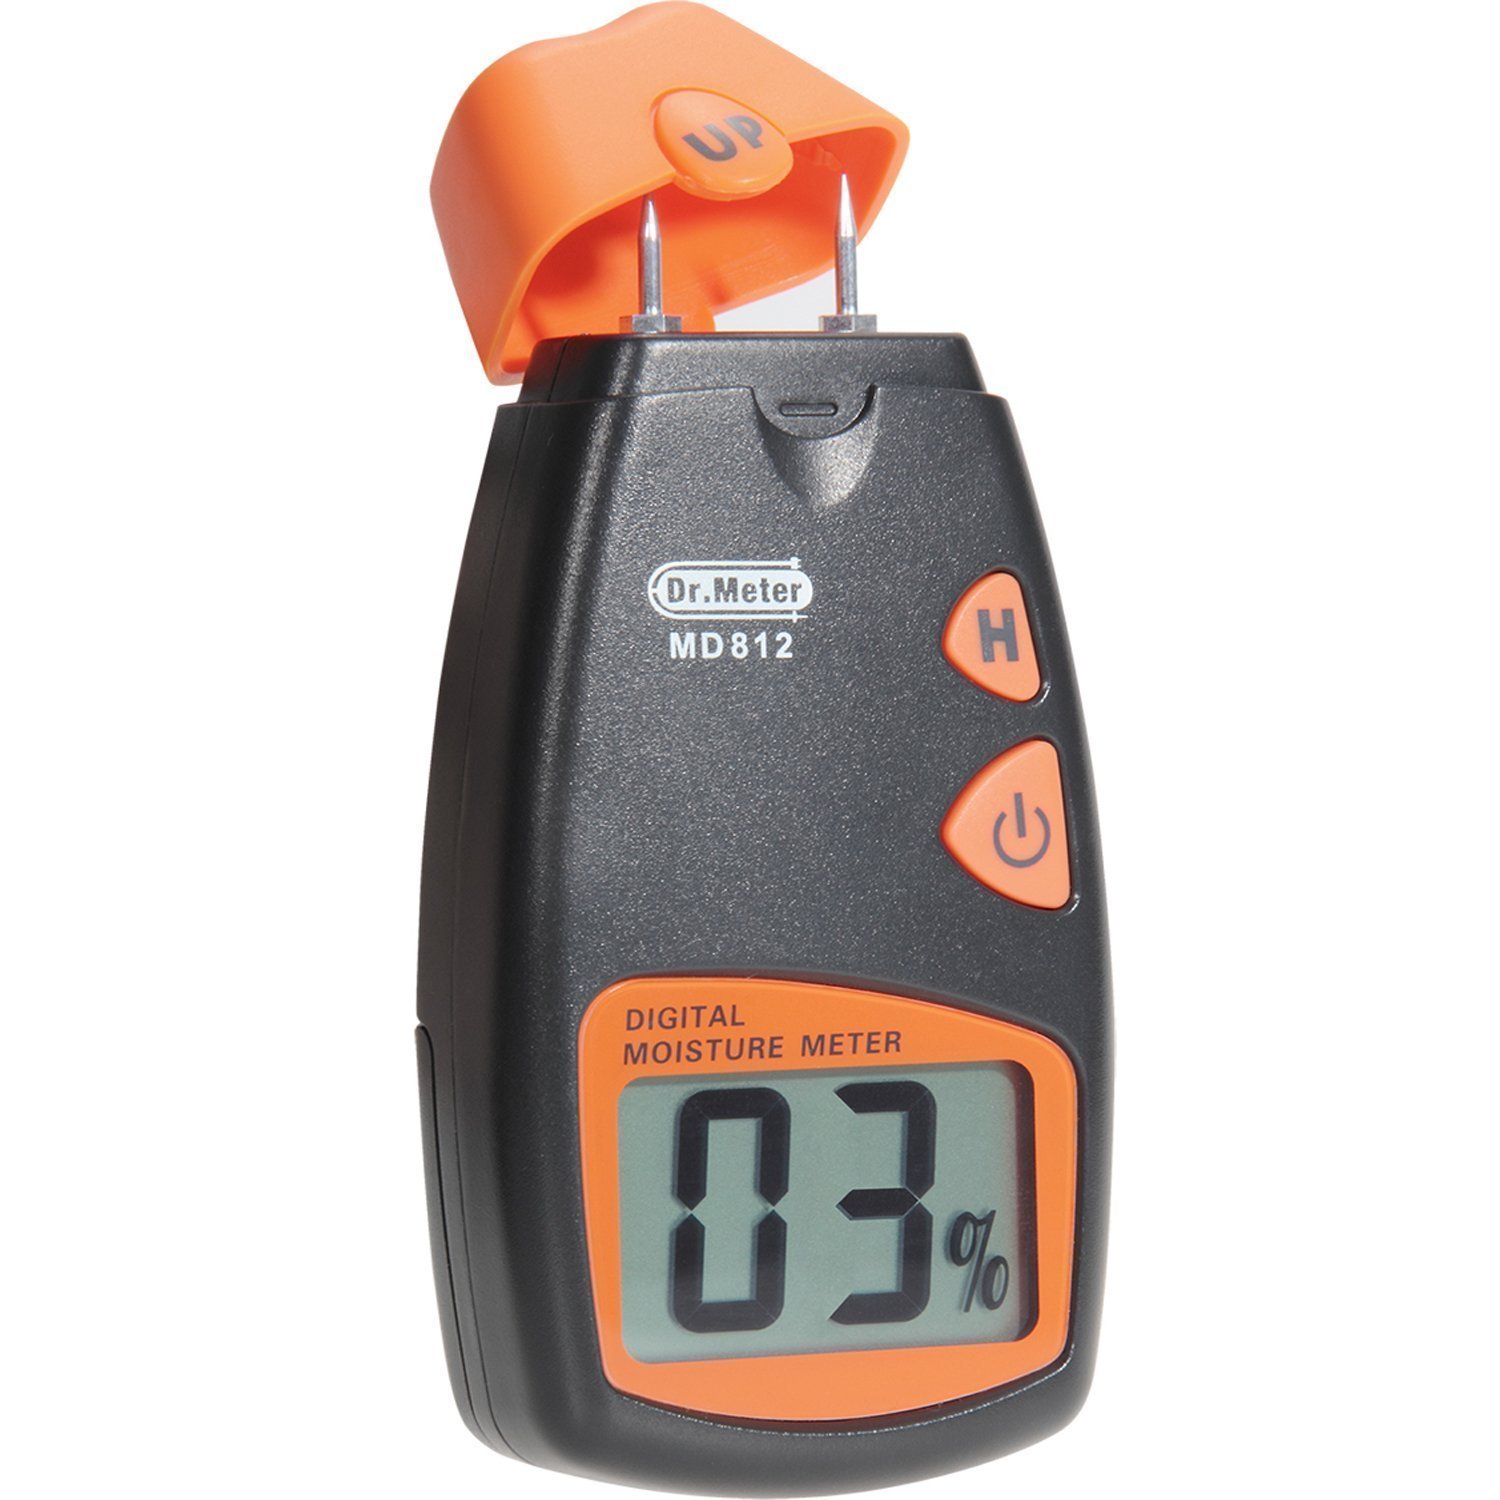 Best Wood Moisture Meter Under 24 - Review of the Top 4 